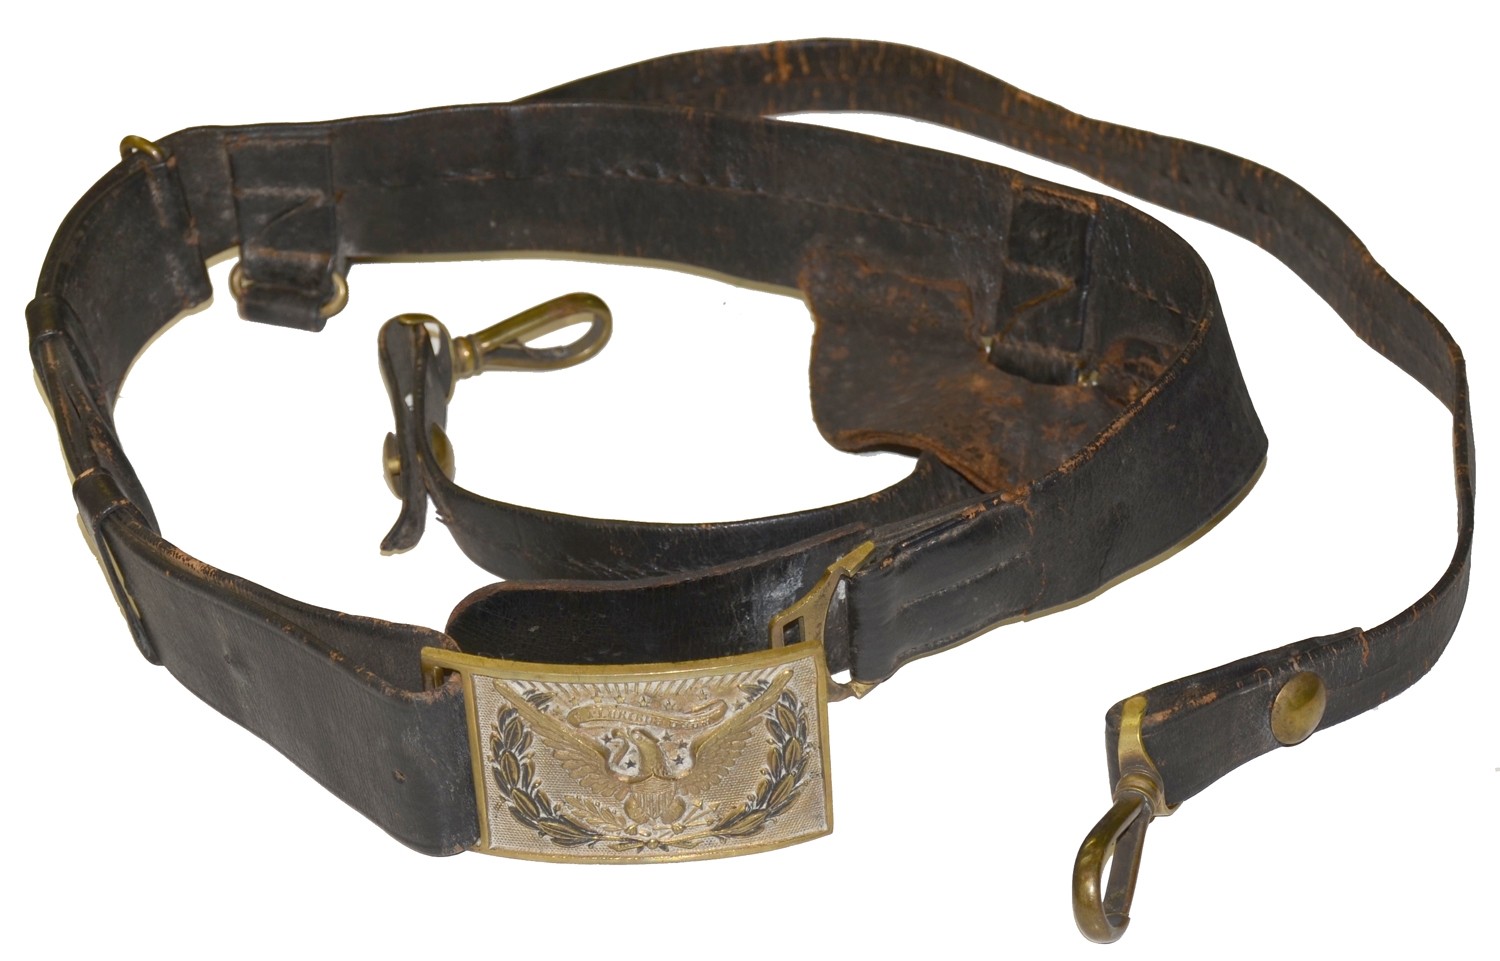 CIVIL WAR US MODEL 1851 CAVALRY OFFICER'S SWORD BELT WITH PLATE